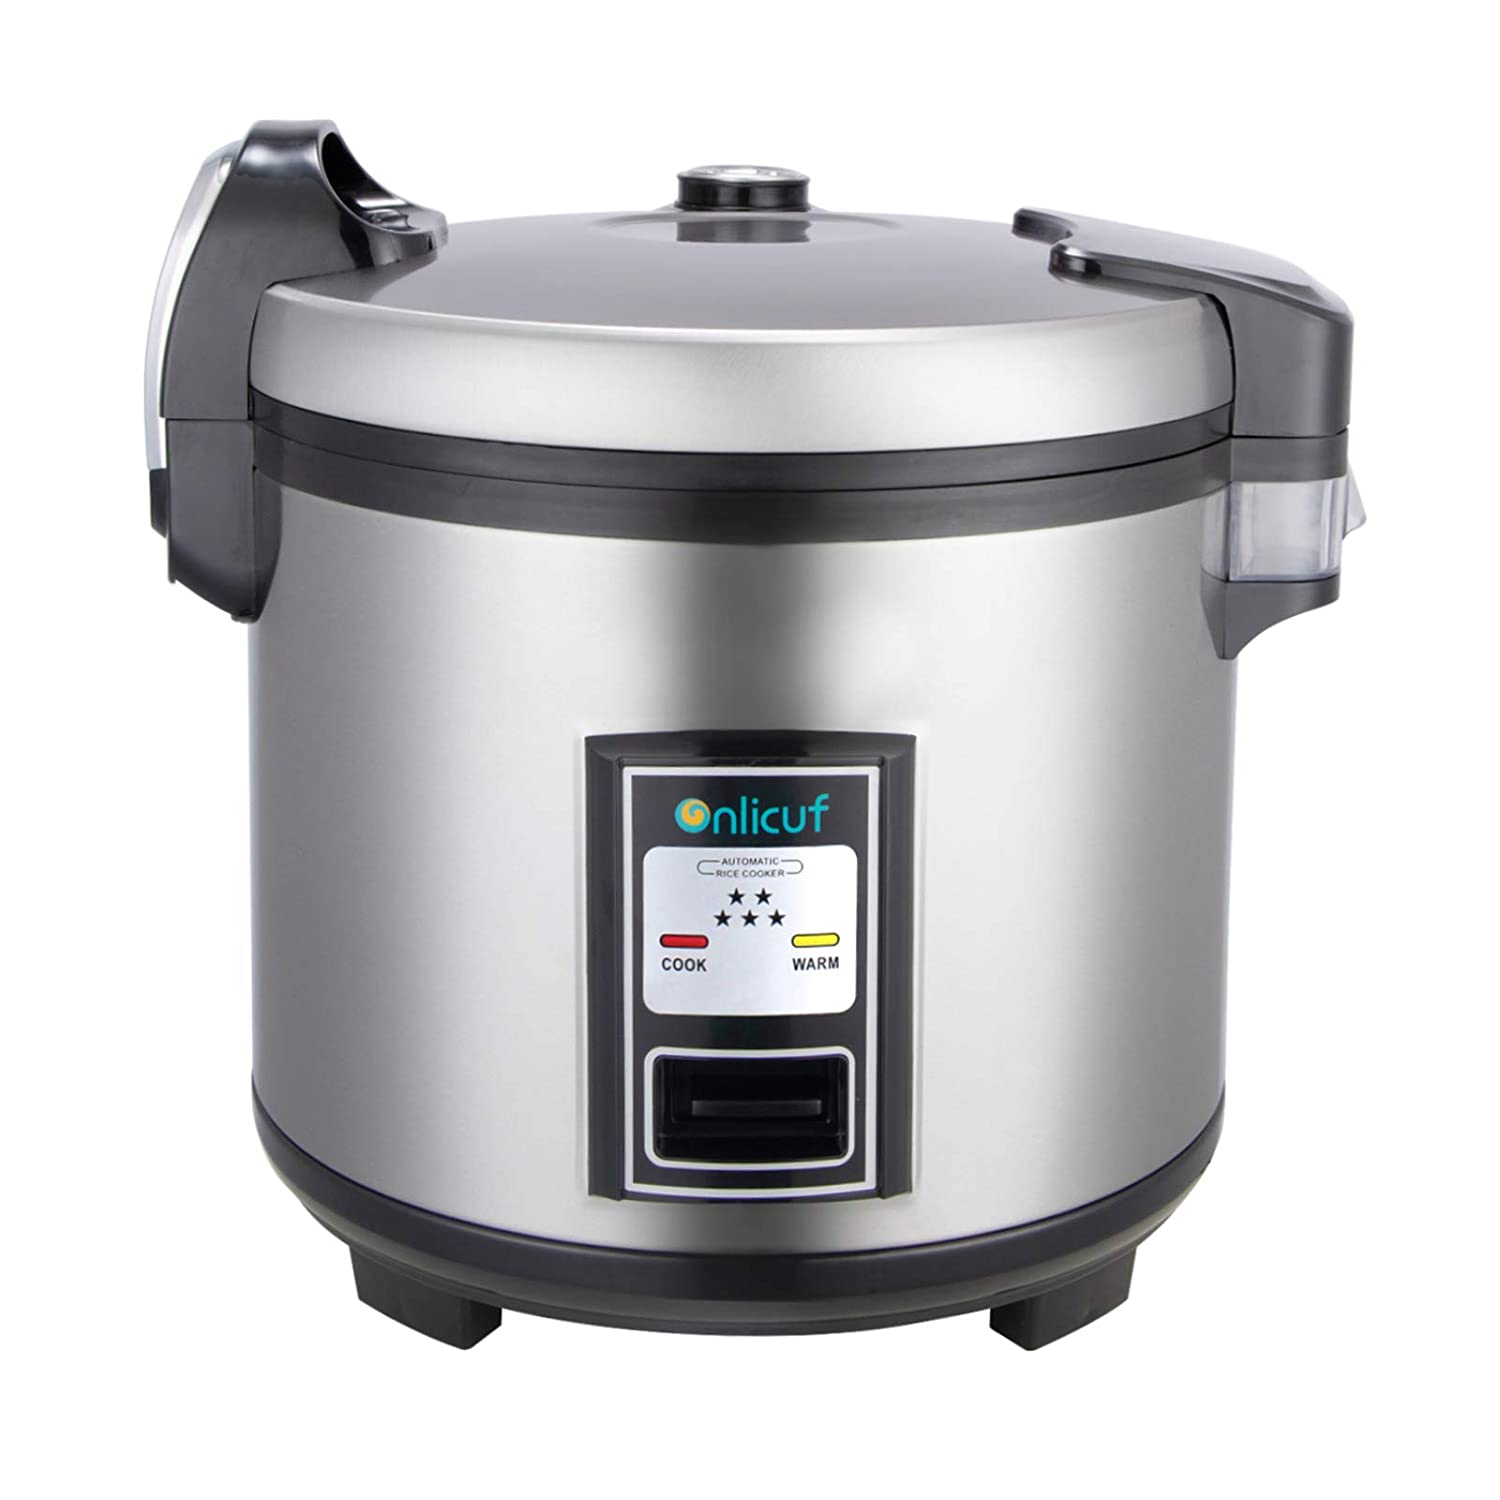 Onlicuf Commercial Electric Stainless Steel Rice Cooker